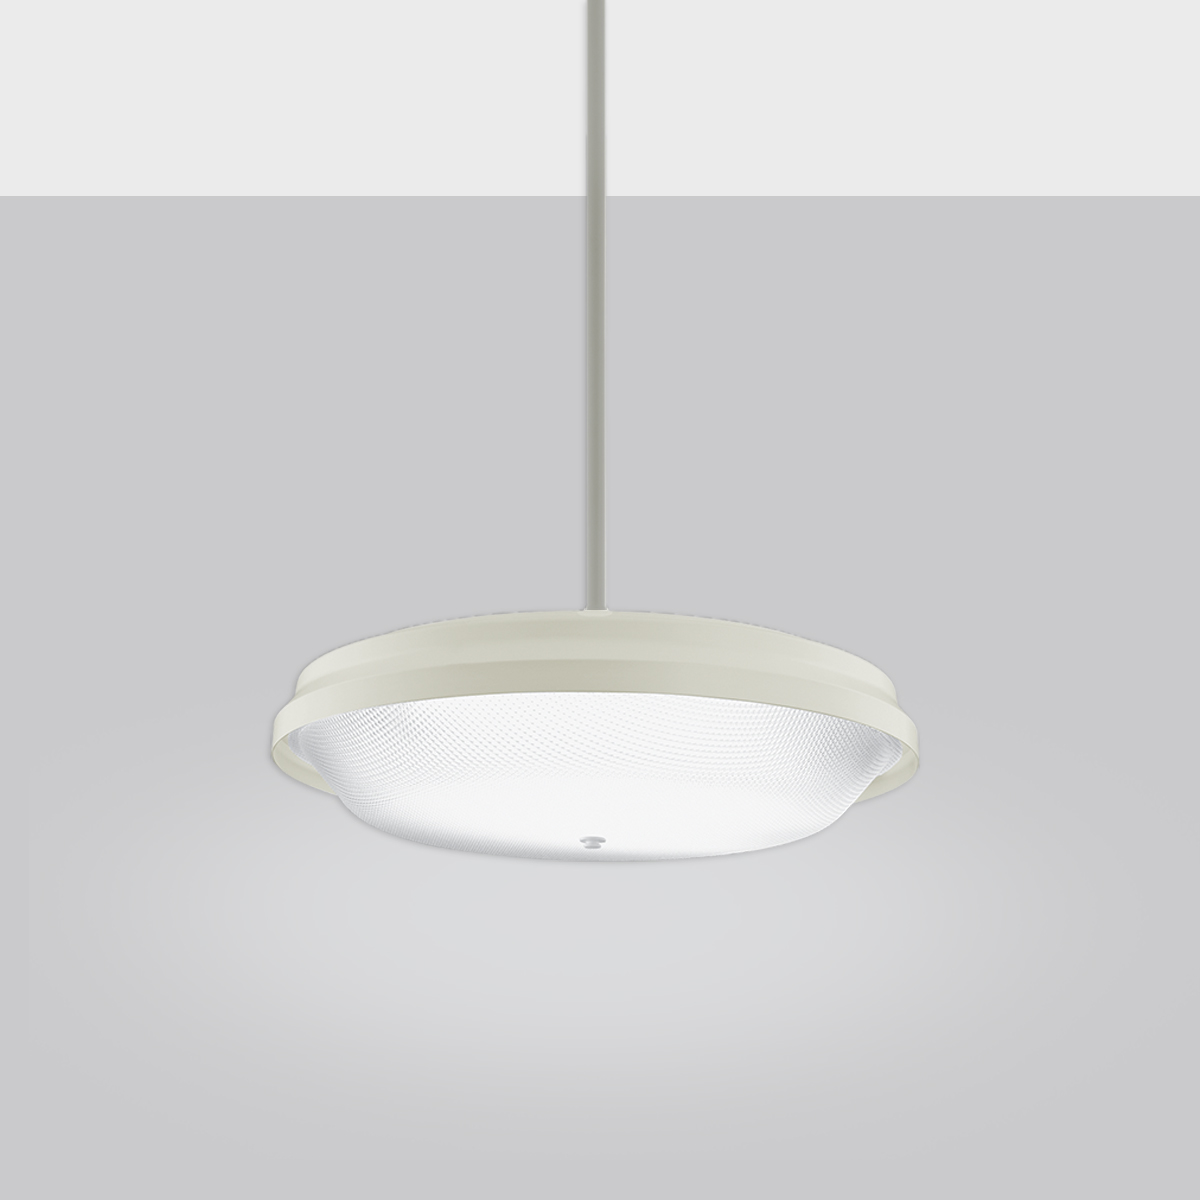 A midbay pendant for industrial performance lighting